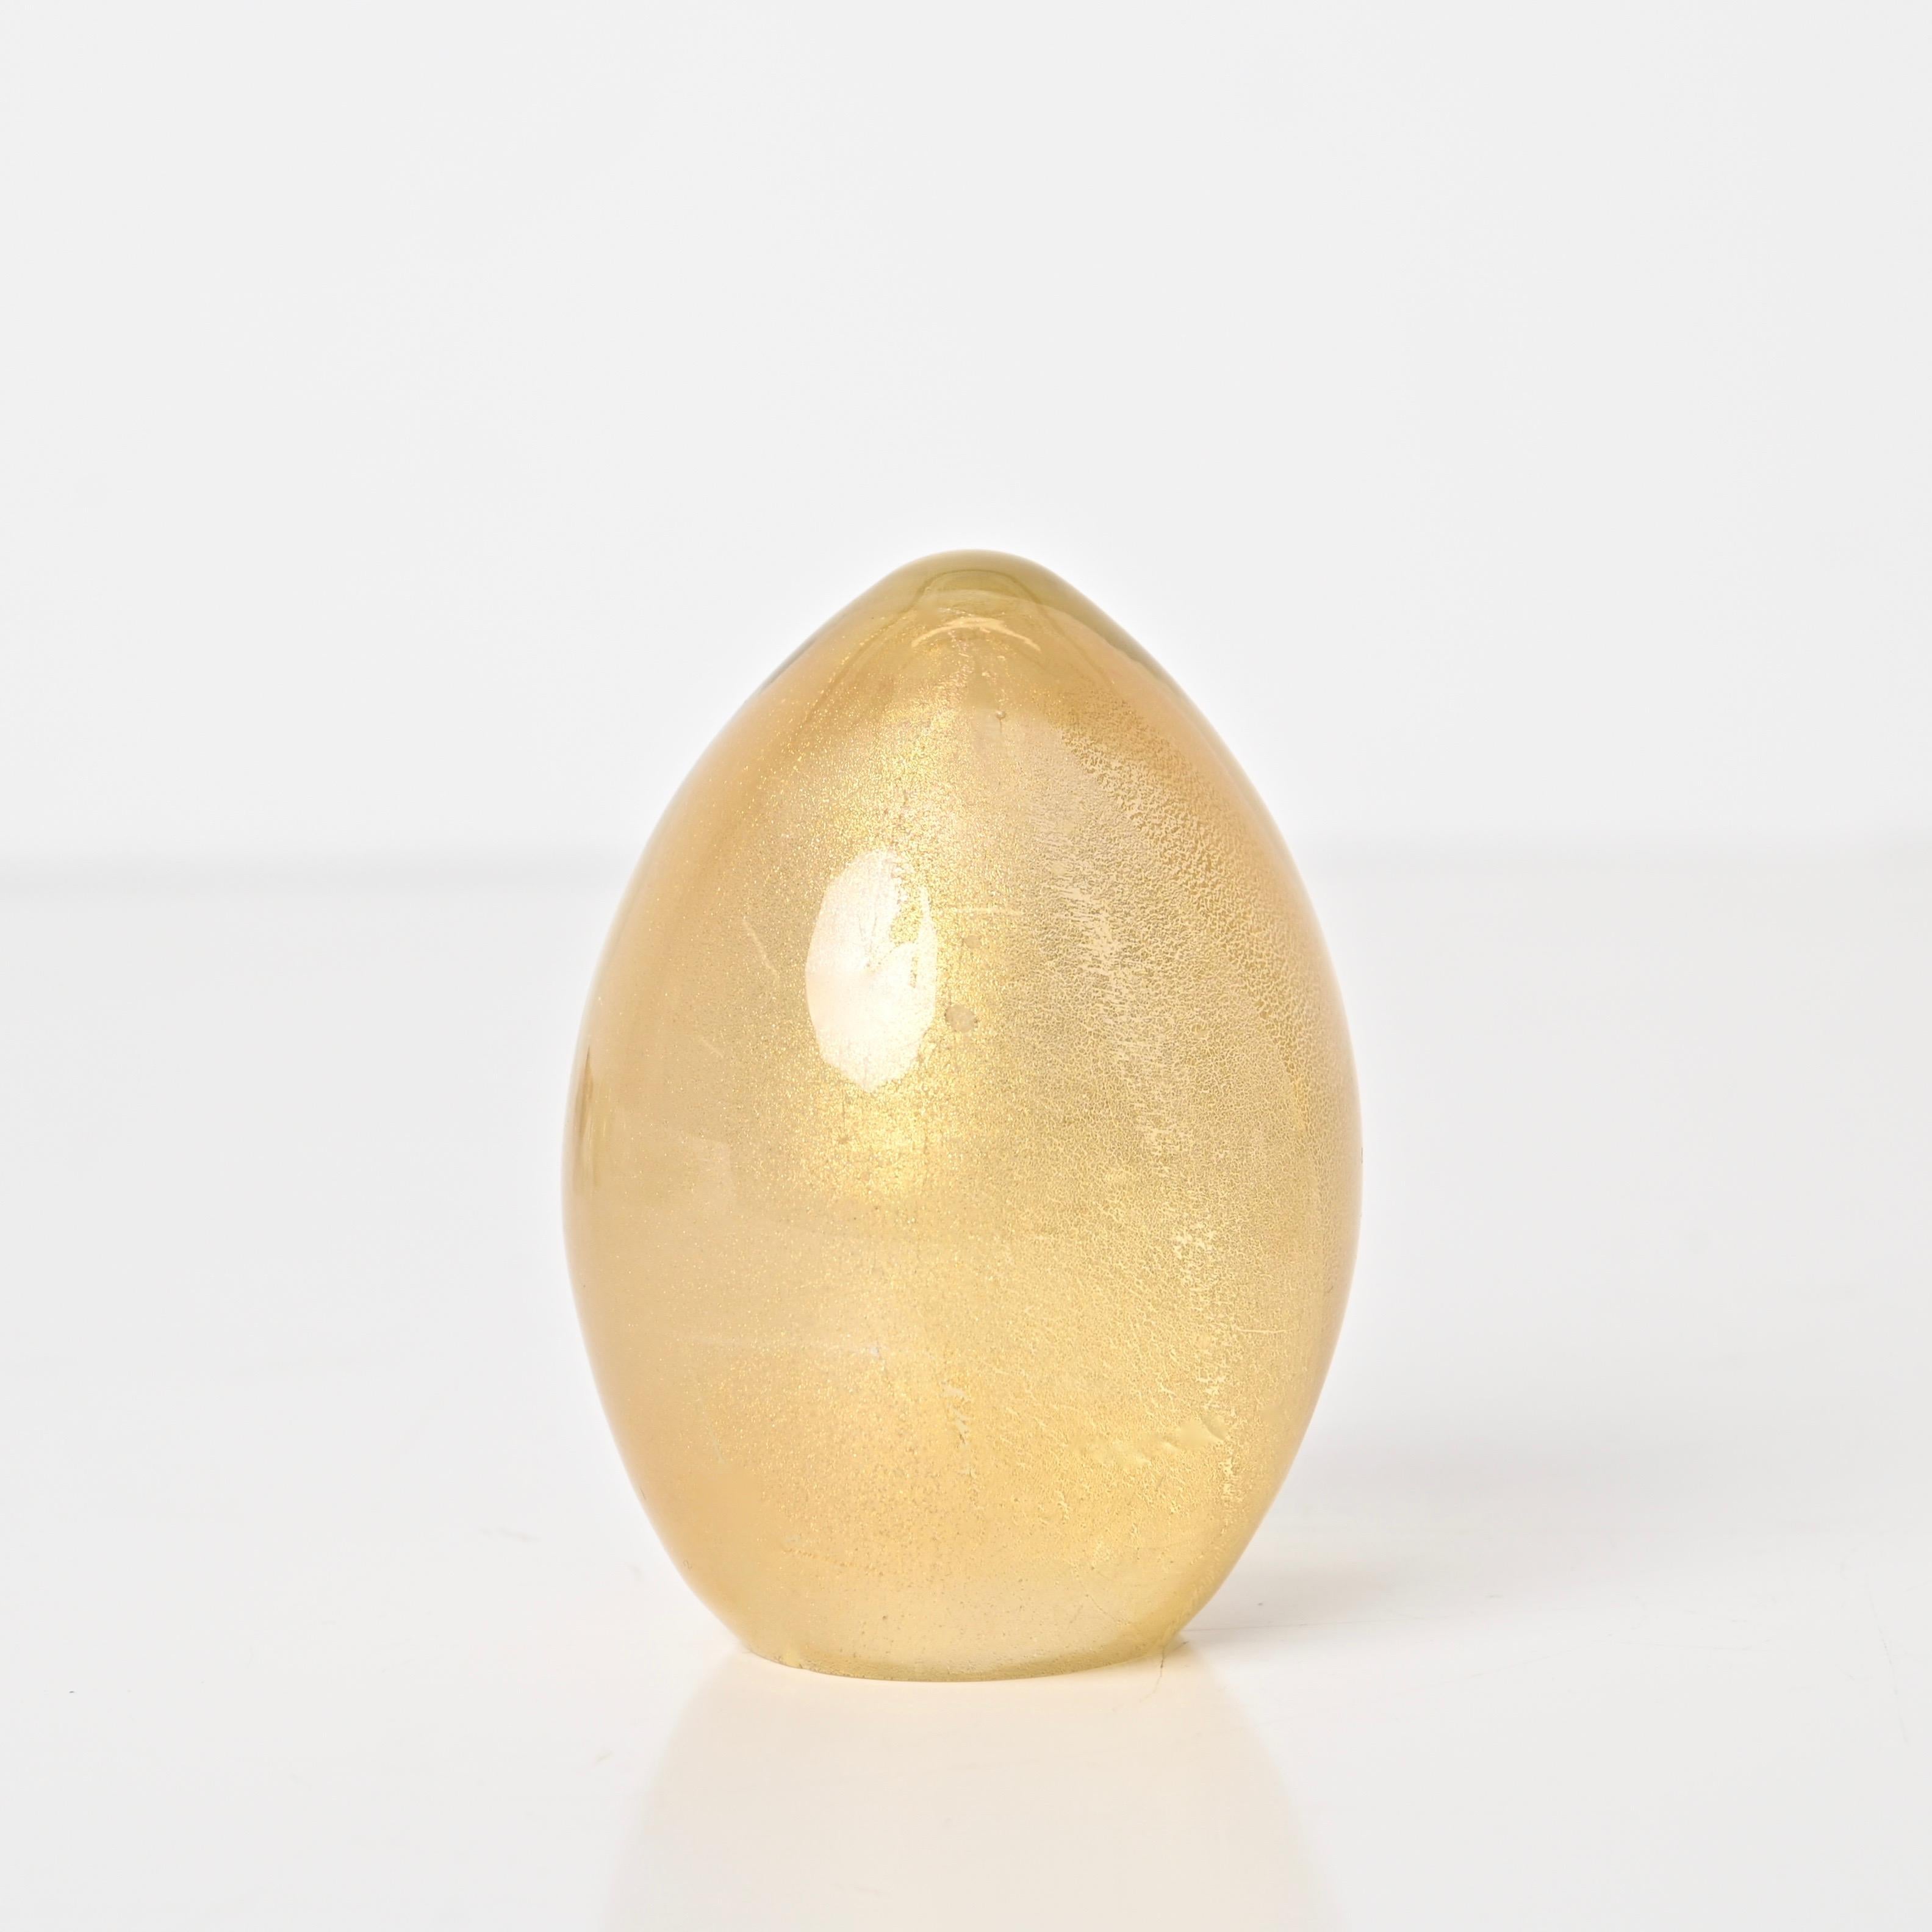 Seguso Murano Egg Paperweight in Murano Glass with Gold Dust, Italy 1950s For Sale 7